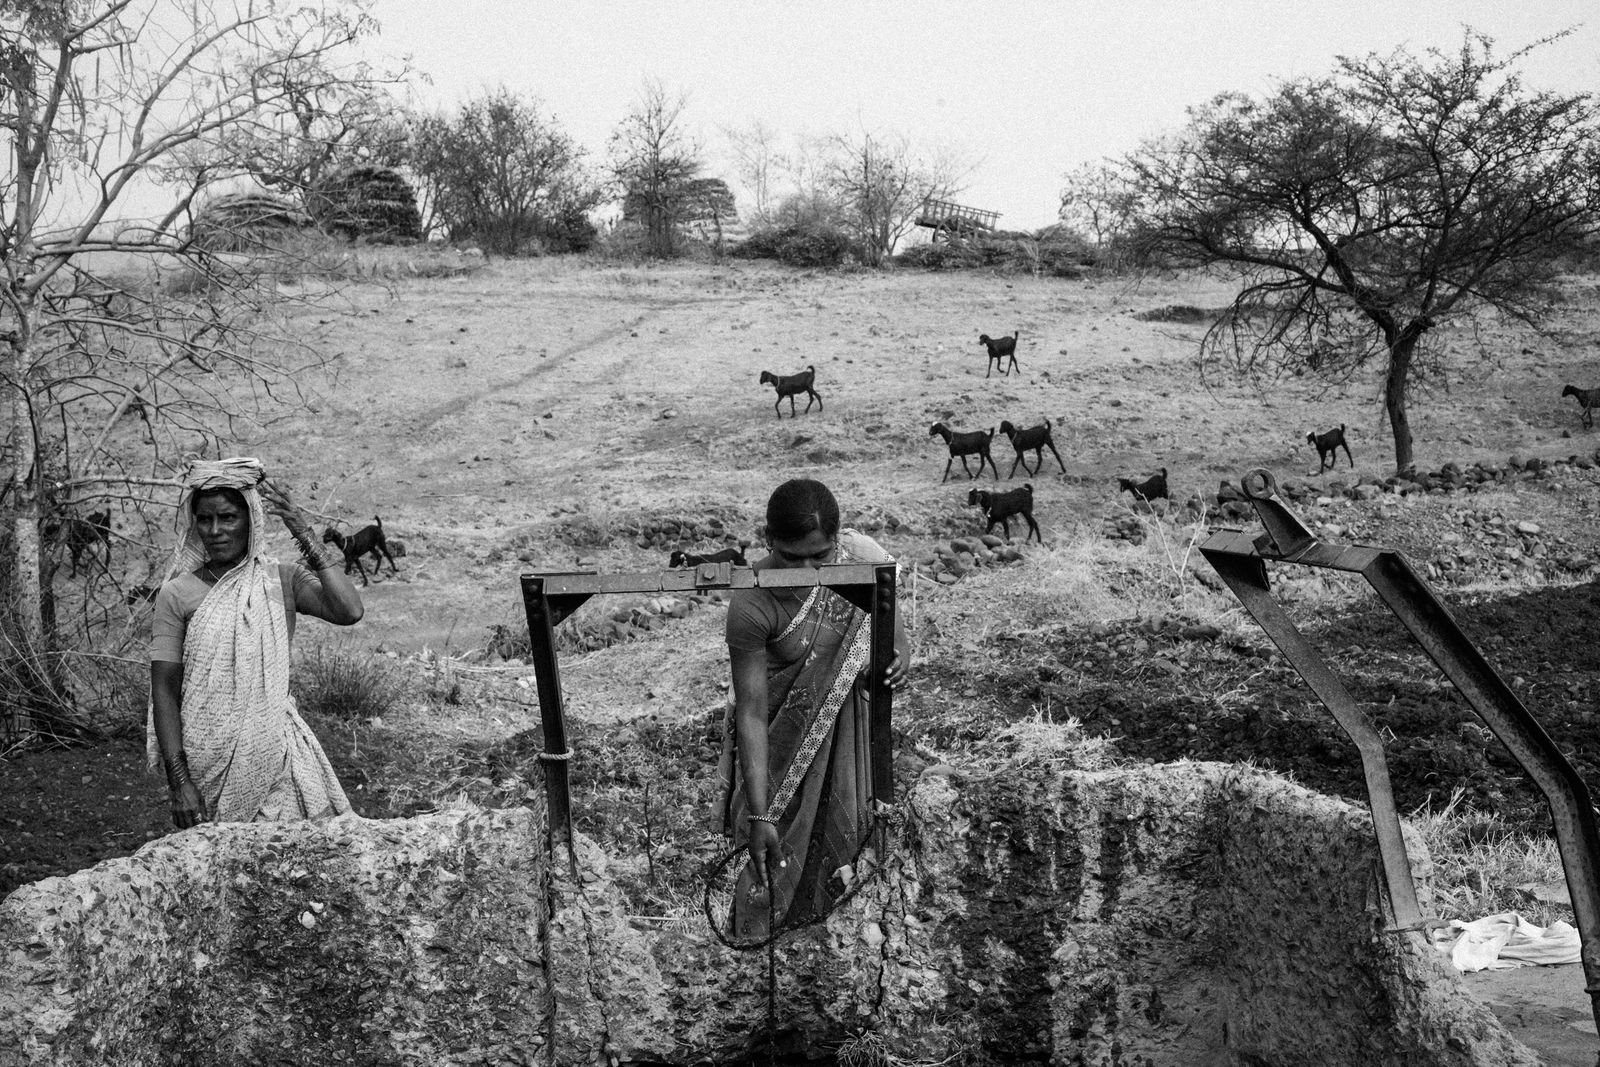 © Harsha Vadlamani - Image from the Dushkaal: Drought and Agrarian Crisis in Marathwada, India. photography project